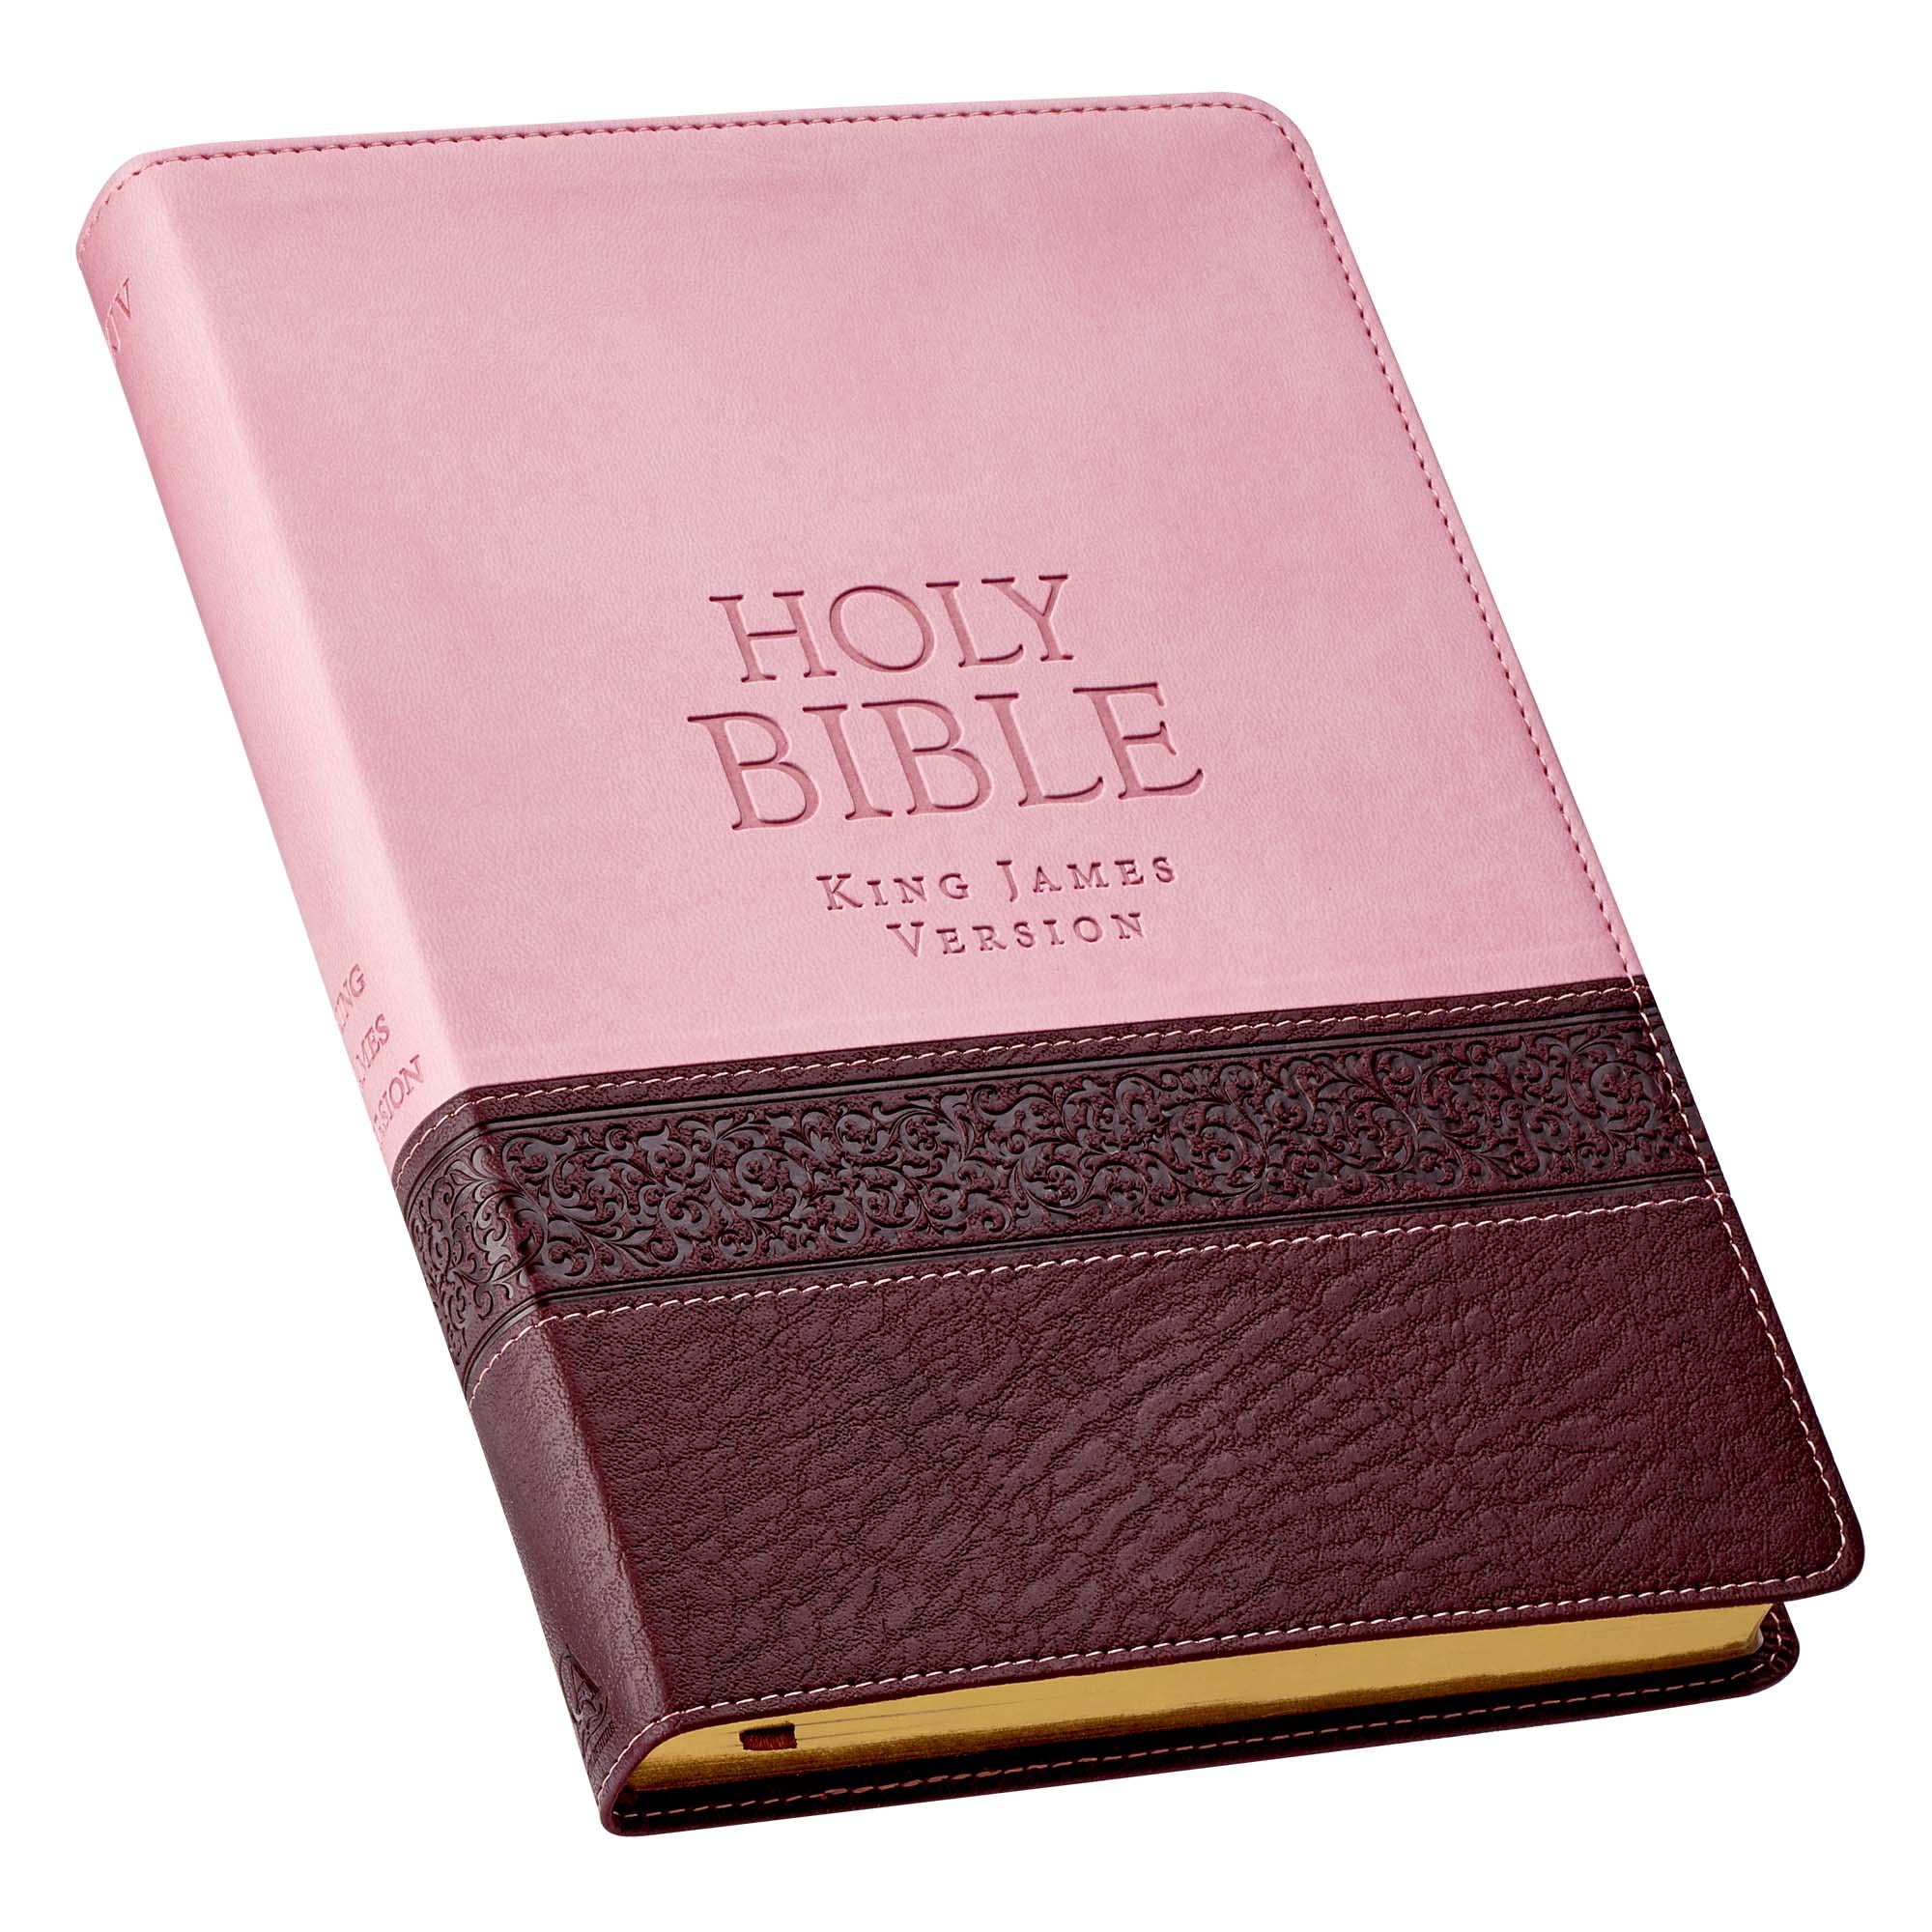 KJV Holy Bible, Thinline Large Print, Pink and Brown Faux Leather w/Ribbon Marker, Red Letter, King James Version